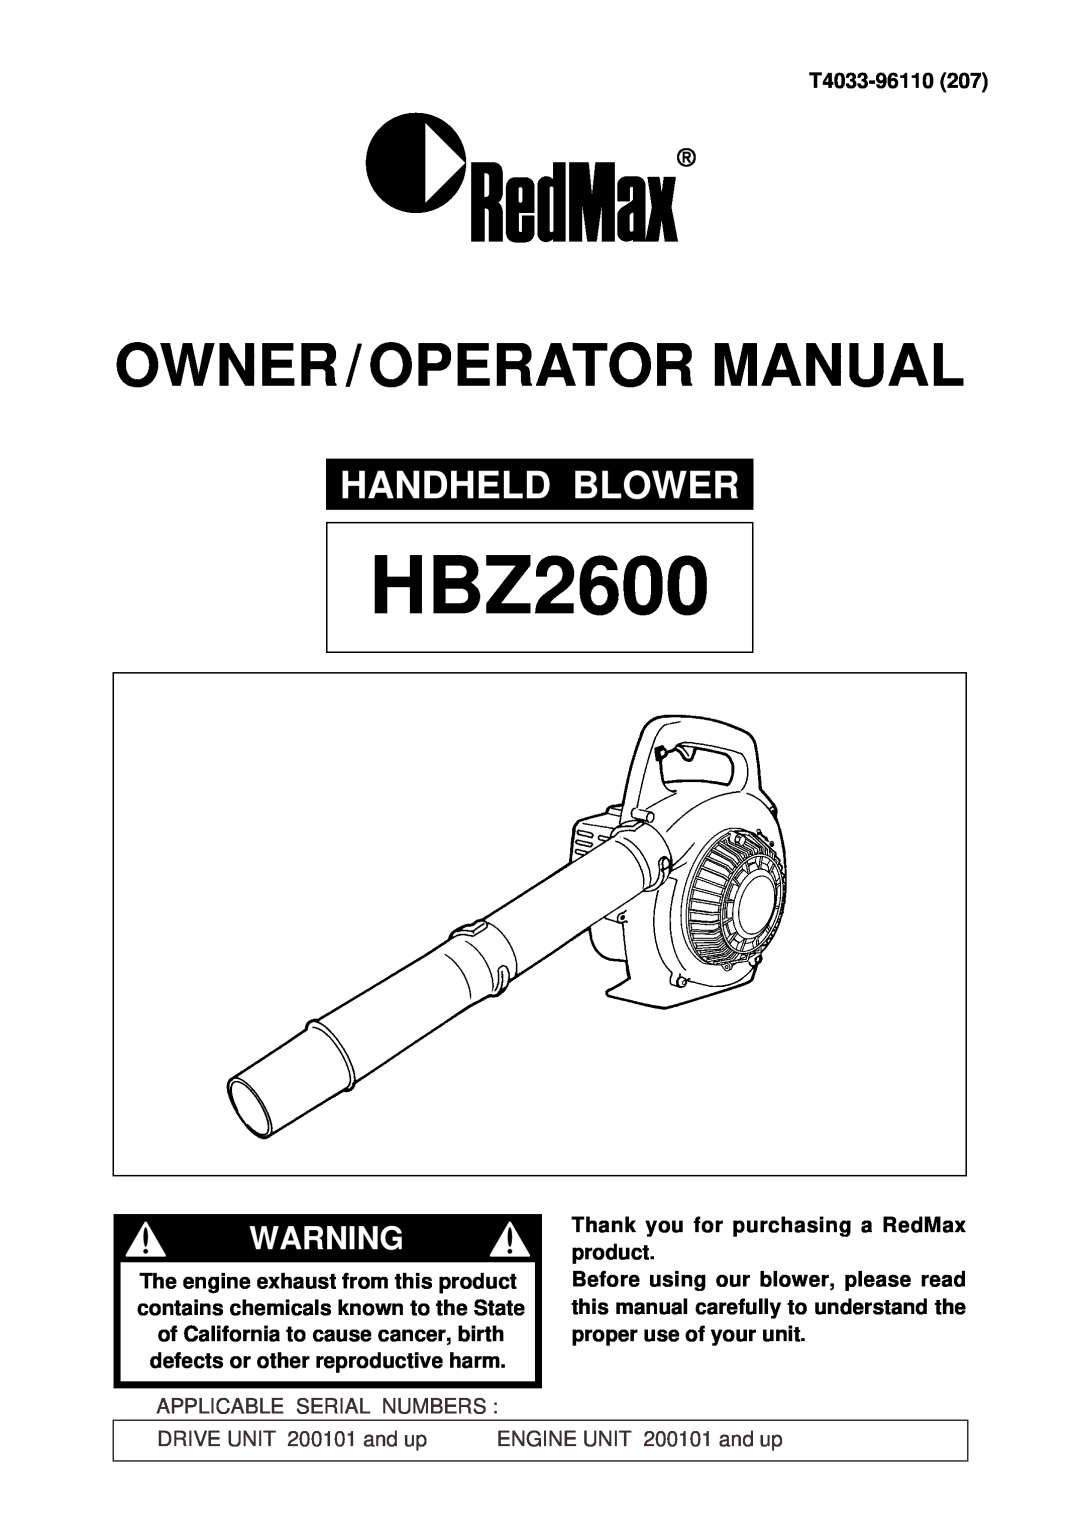 RedMax HBZ2600 manual Handheld Blower, Owner / Operator Manual, T4033-96110207, Thank you for purchasing a RedMax product 